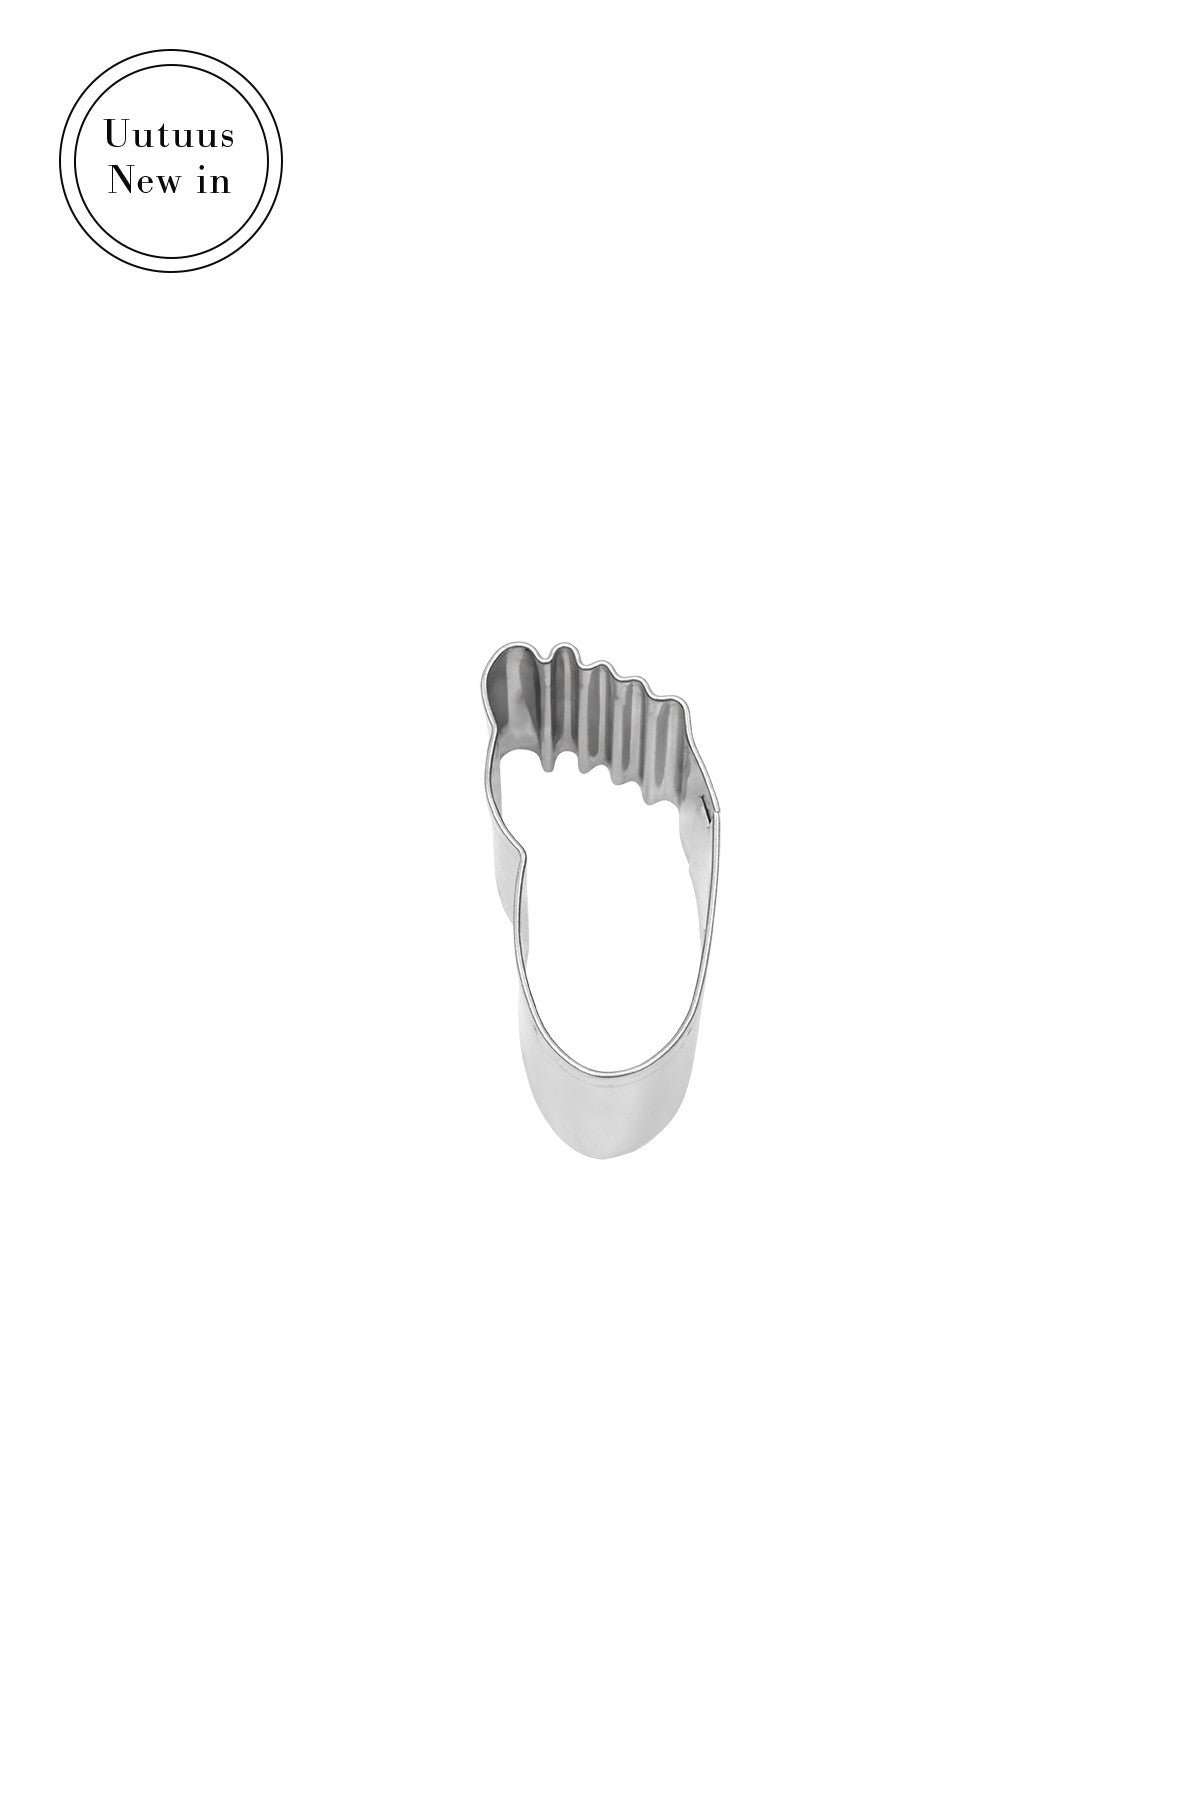 BABY FOOT 6 cm COOKIE CUTTER